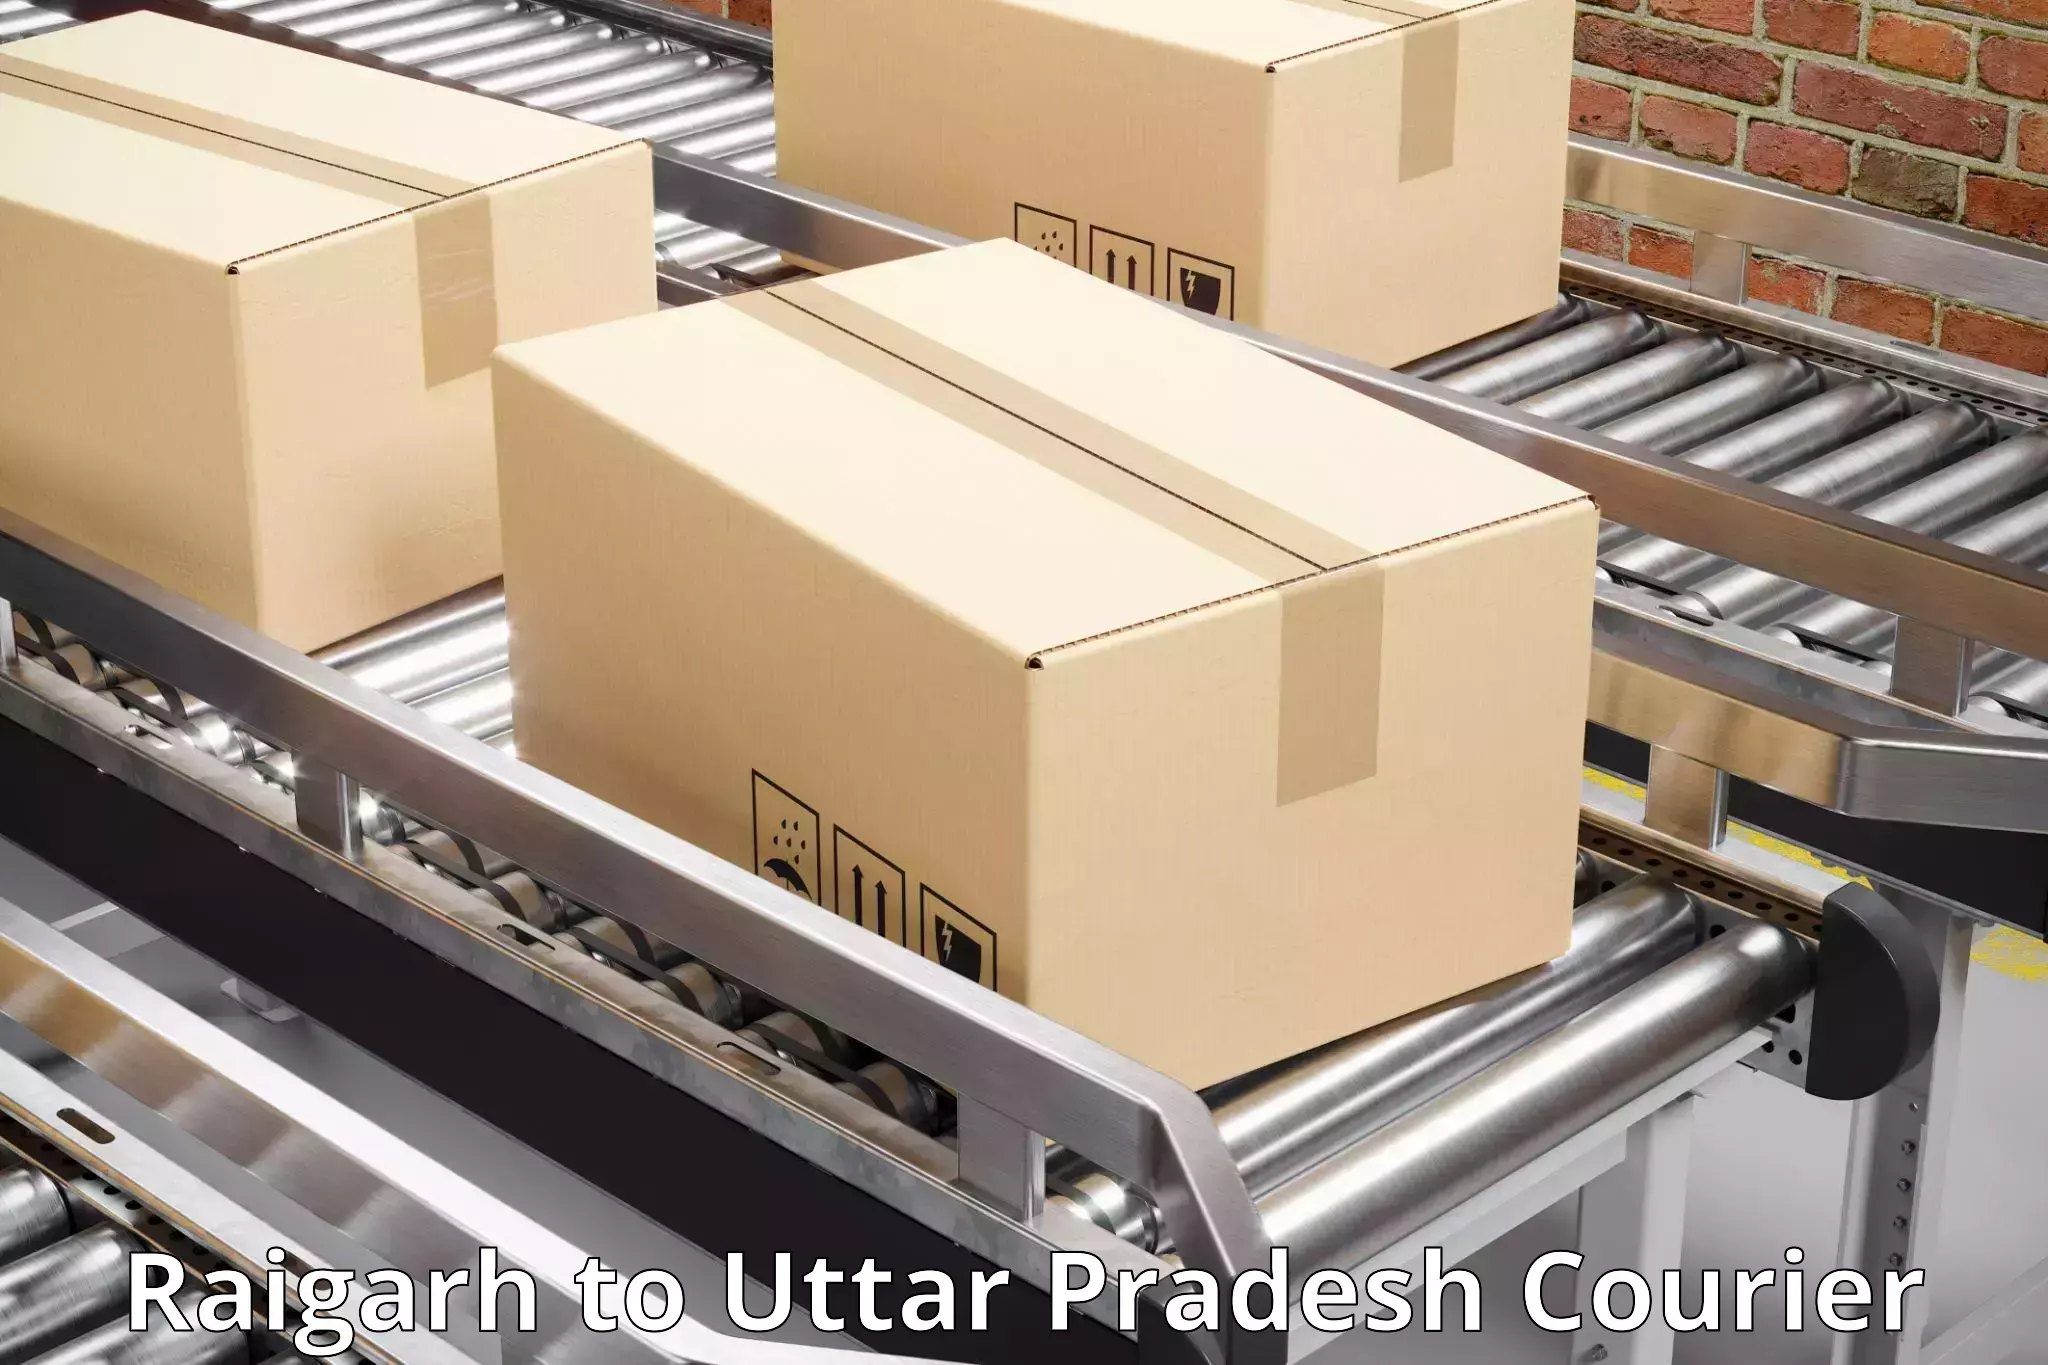 Courier service partnerships Raigarh to Chirgaon